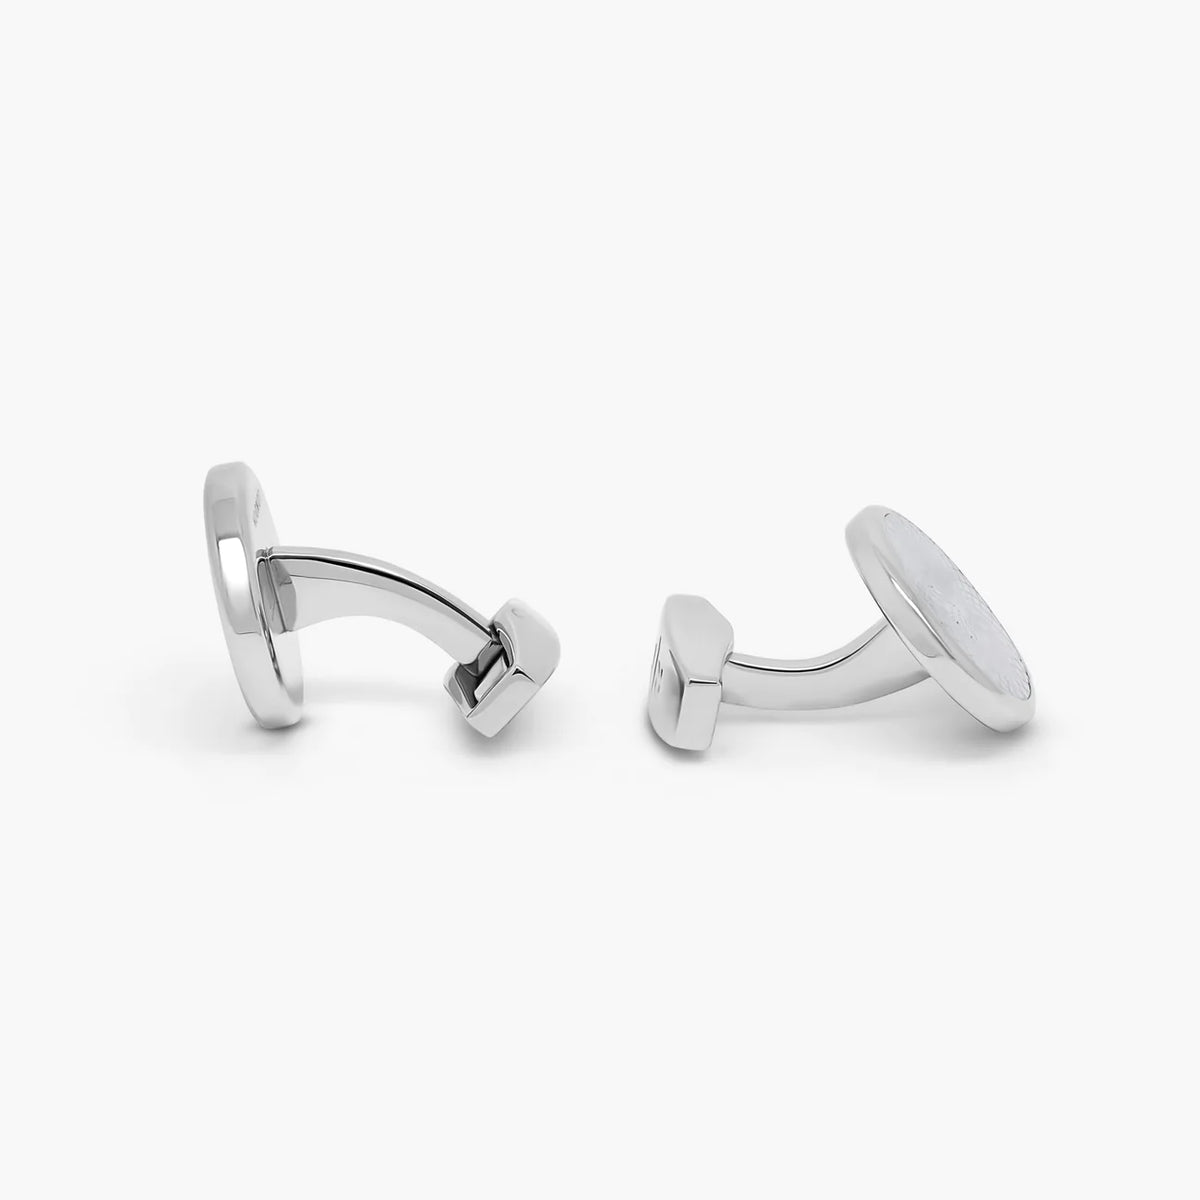 TATEOSSIAN ROTONDO GUILLOCHE CUFFLINKS AND STUDS SET - WHITE MOTHER OF PEARL AND STAINLESS STEEL